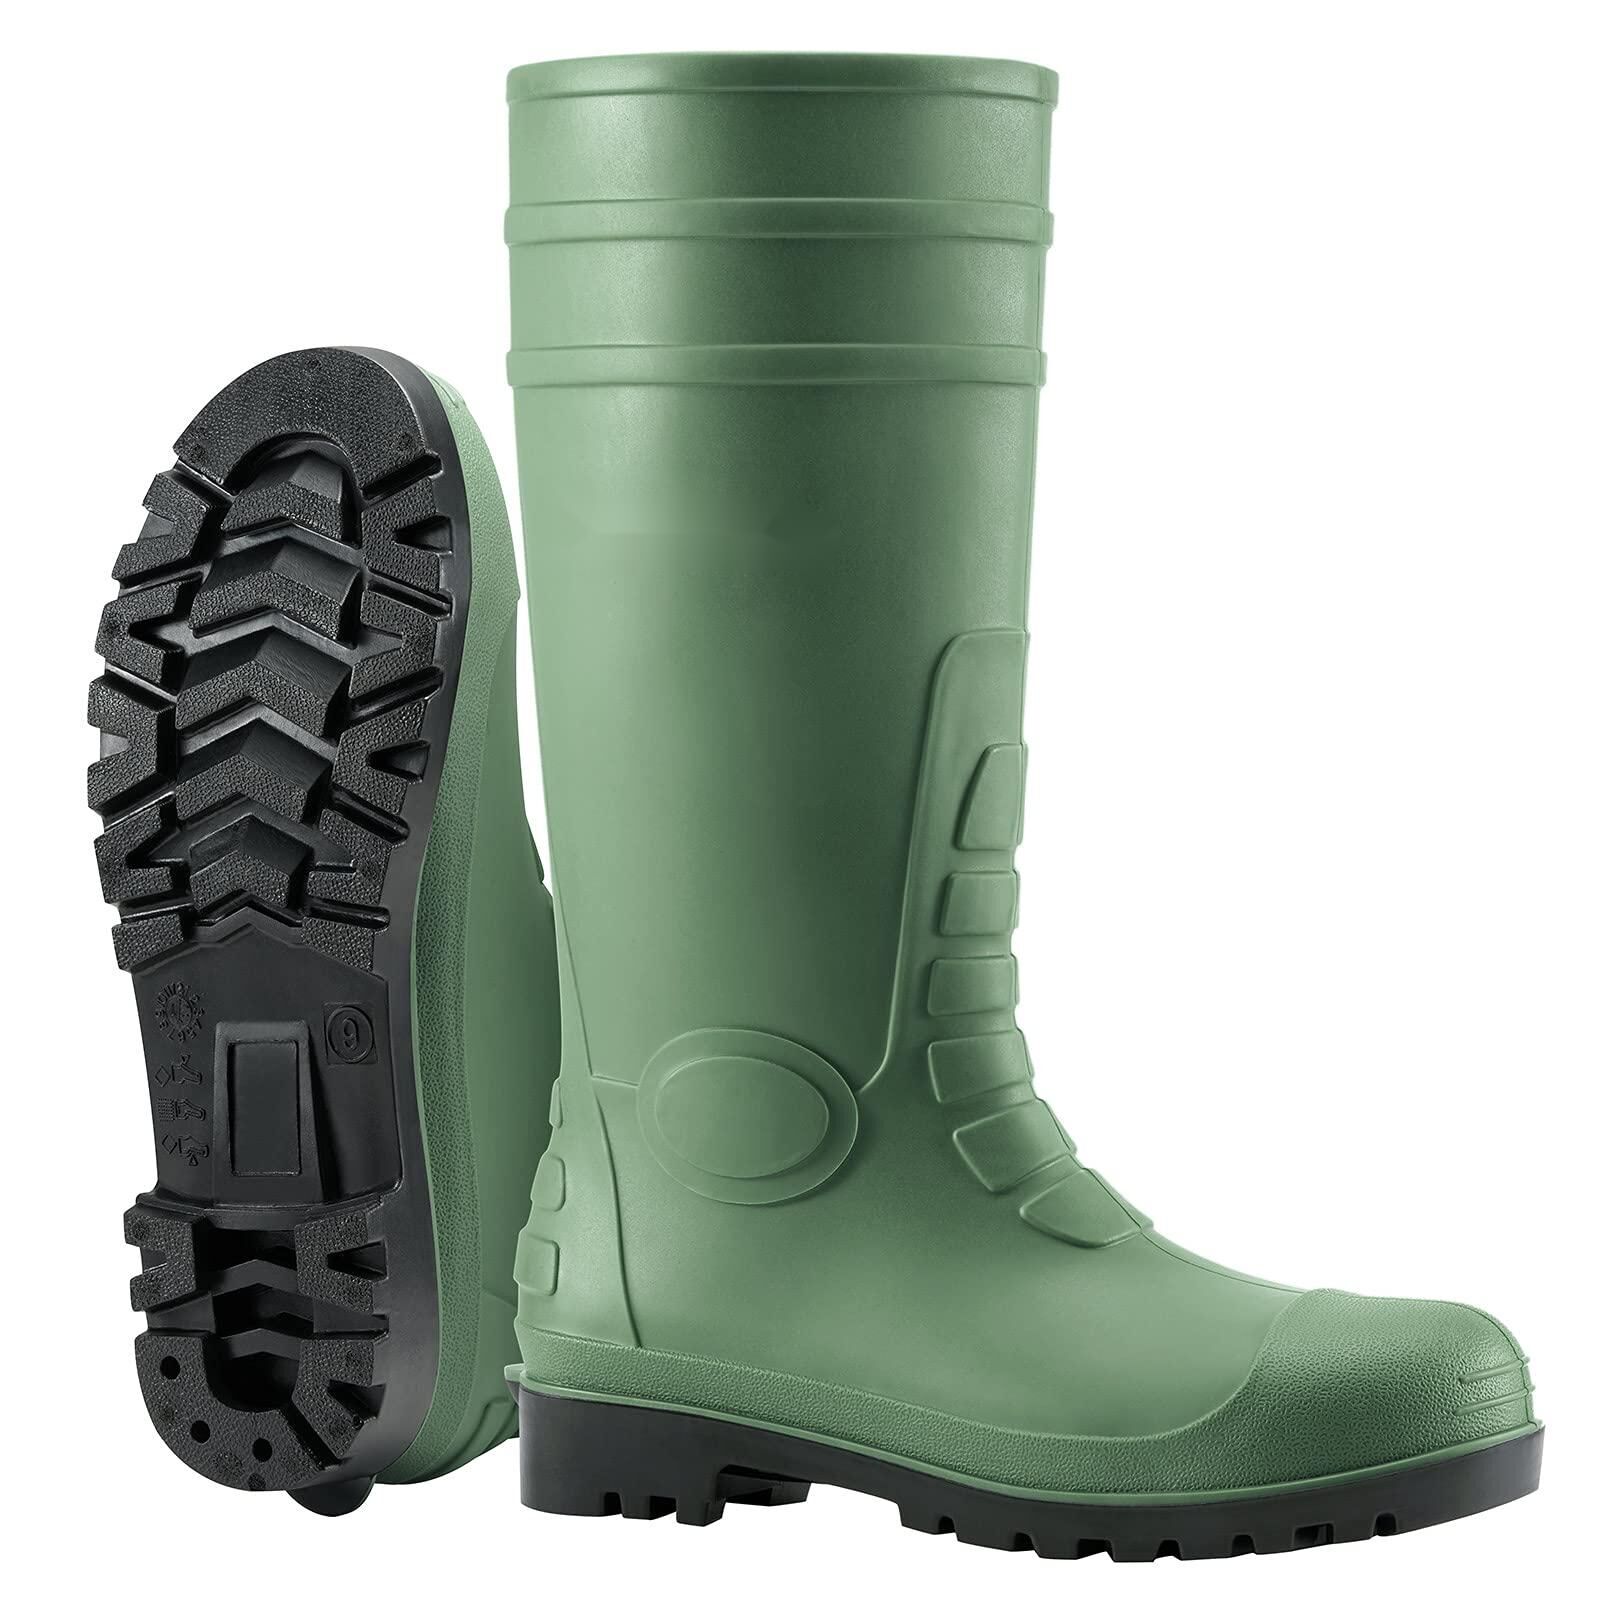 Men's Steel Toe Rain Boots Pvc Rubber Boots, Waterproof Garden Fishing  Outdoor Work Boots, Durable Slip Resistant Knee Boots $7.7 - Wholesale  China Pvc Rubber Boots at Factory Prices from Huangyuxing Group